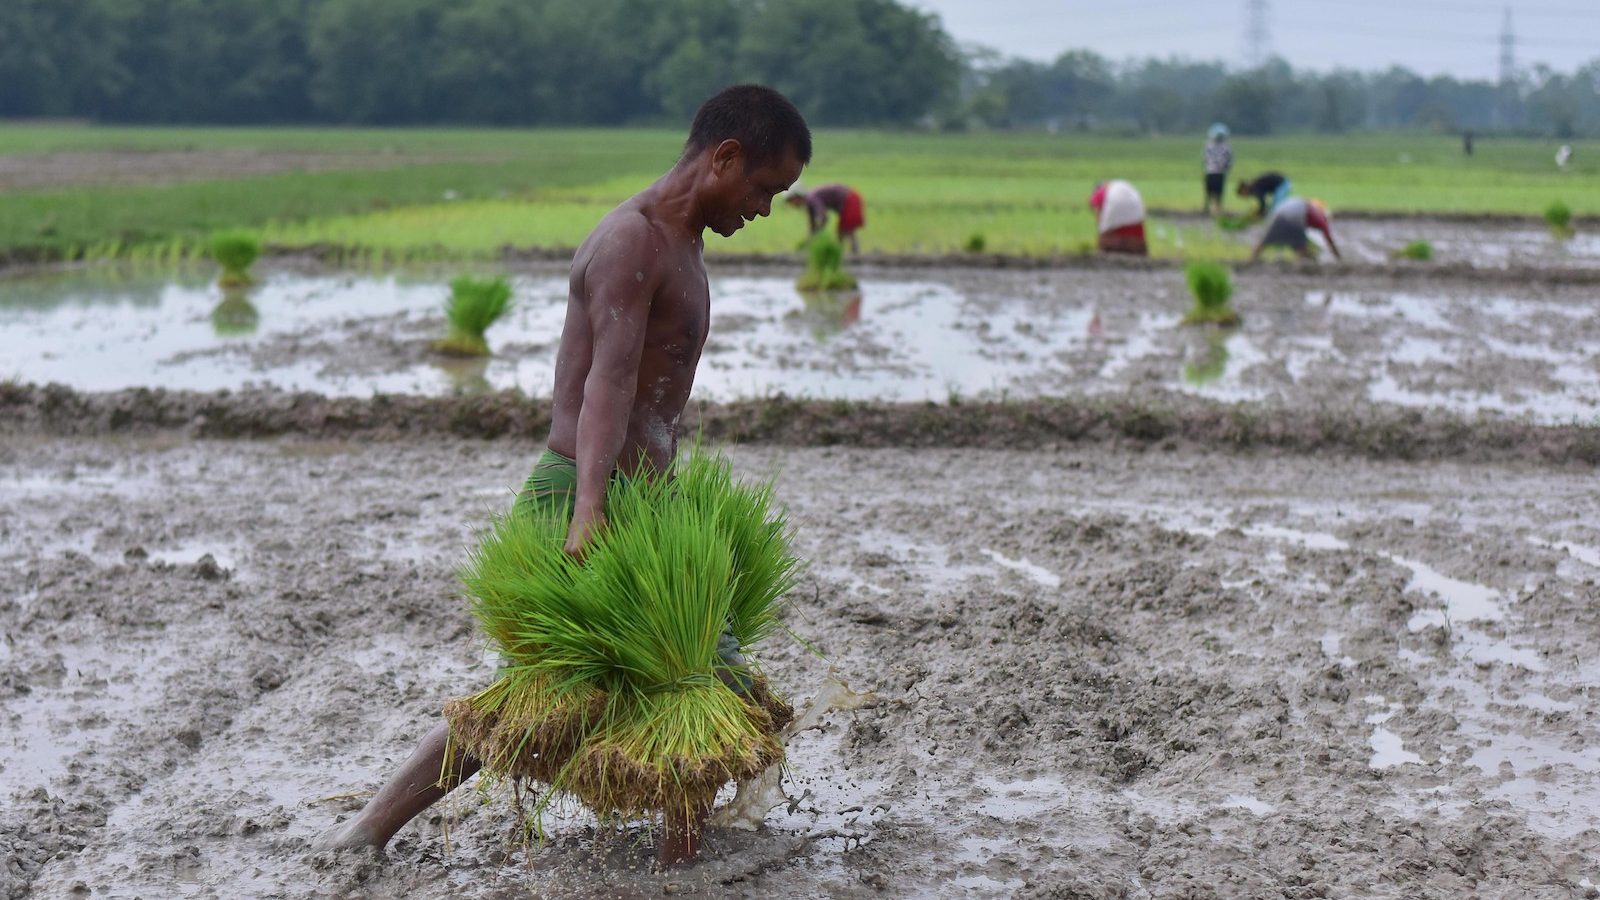 A farmer carries rice seedlings to be planted in a paddy field at a village in Nagaon district of India's northeastern state of Assam, on July 3, 2021.